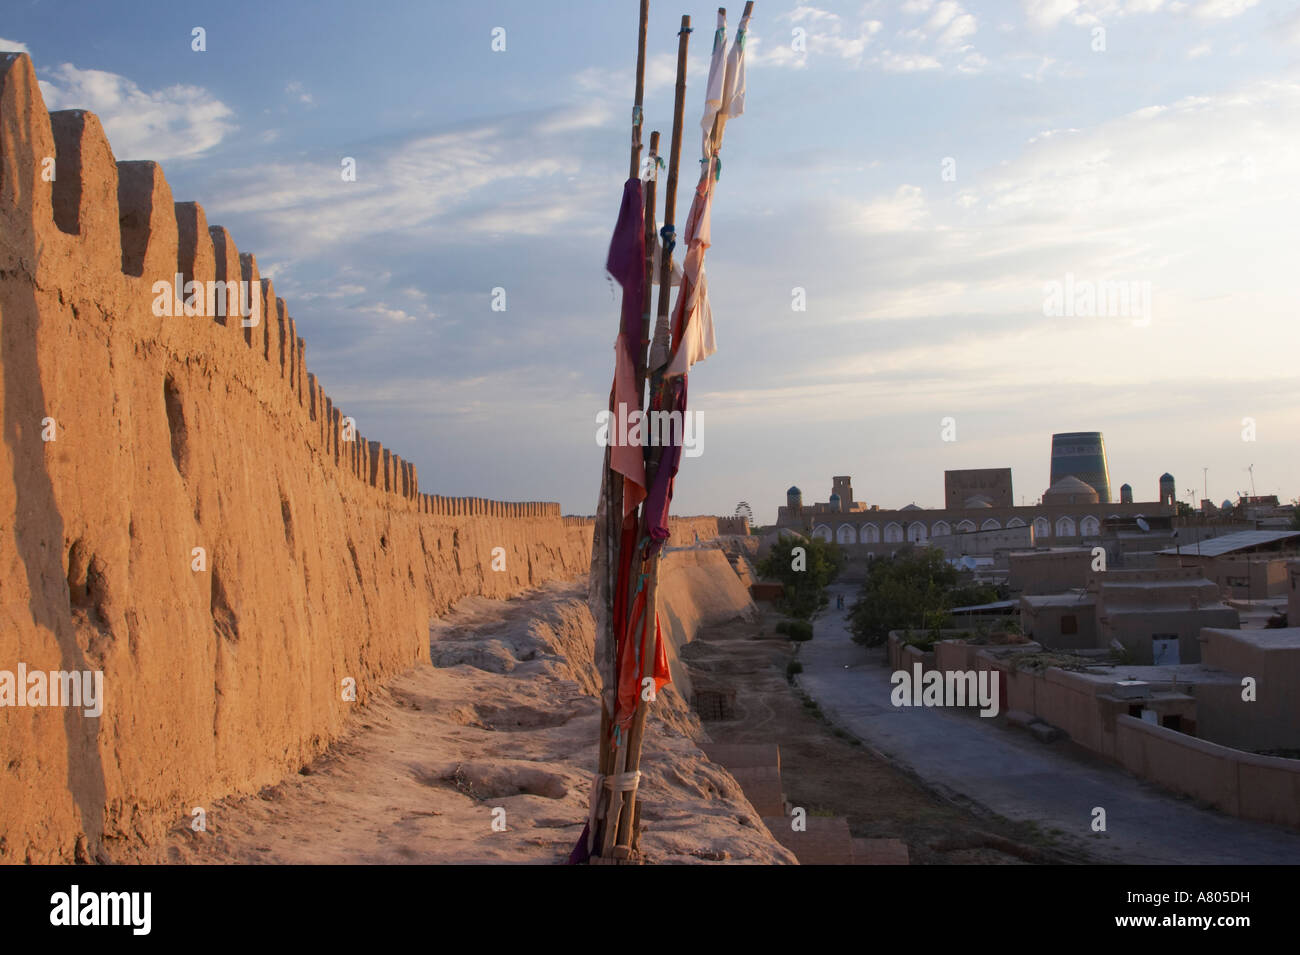 Flags On Khiva City Walls At Dawn Stock Photo